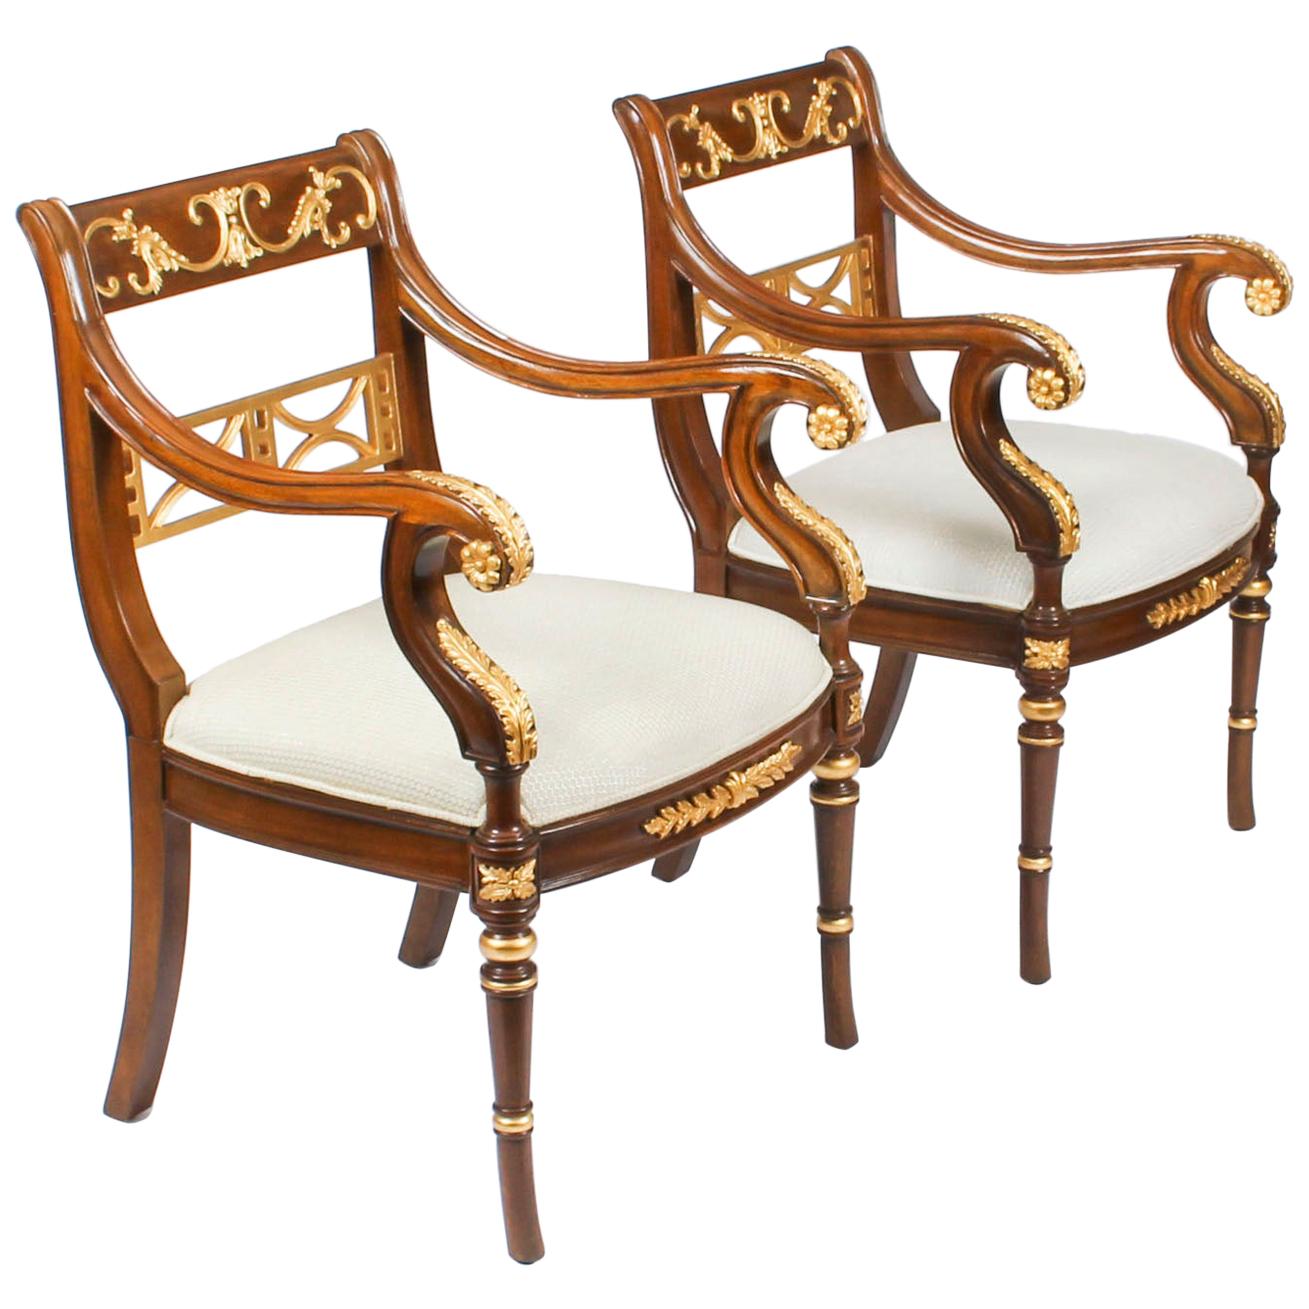 Vintage Pair of Empire Revival Mahogany & Giltwood Armchairs, Late 20th Century